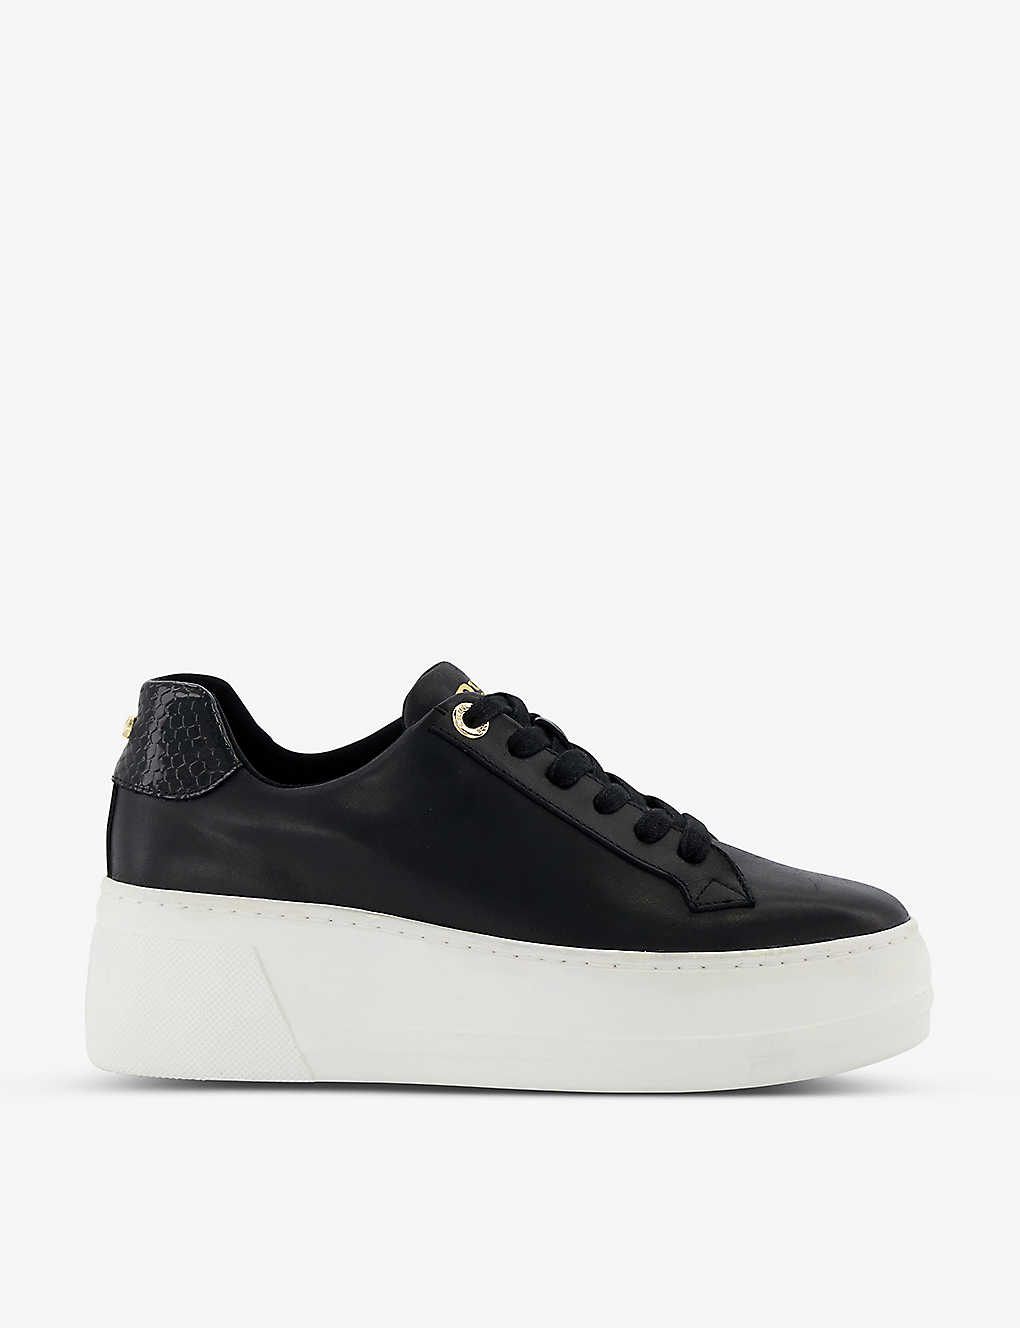 Dune Womens Black-rept Print Leather Episode Leather Flatform Low-top Trainers